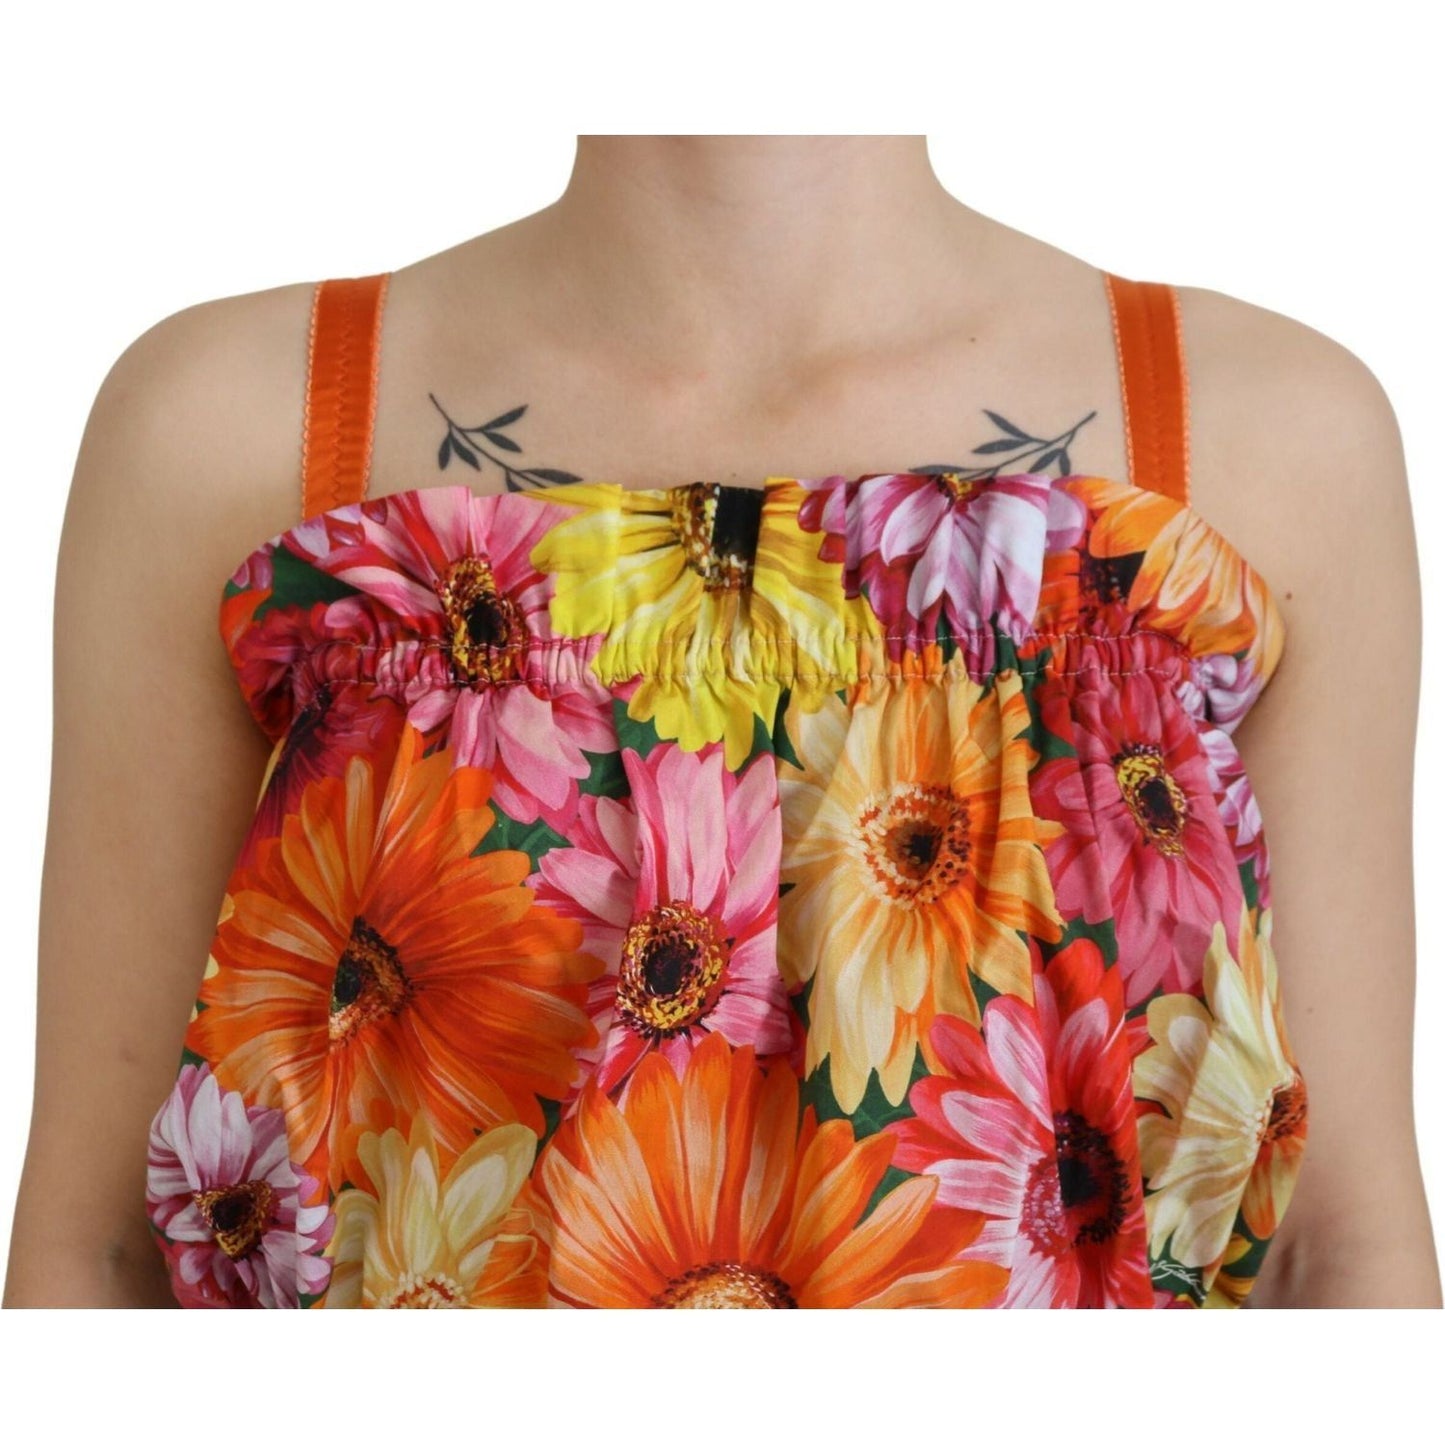 Dolce & Gabbana Floral Elegance Sleeveless Cropped Top blouse-cropped-floral-cotton-tank-top